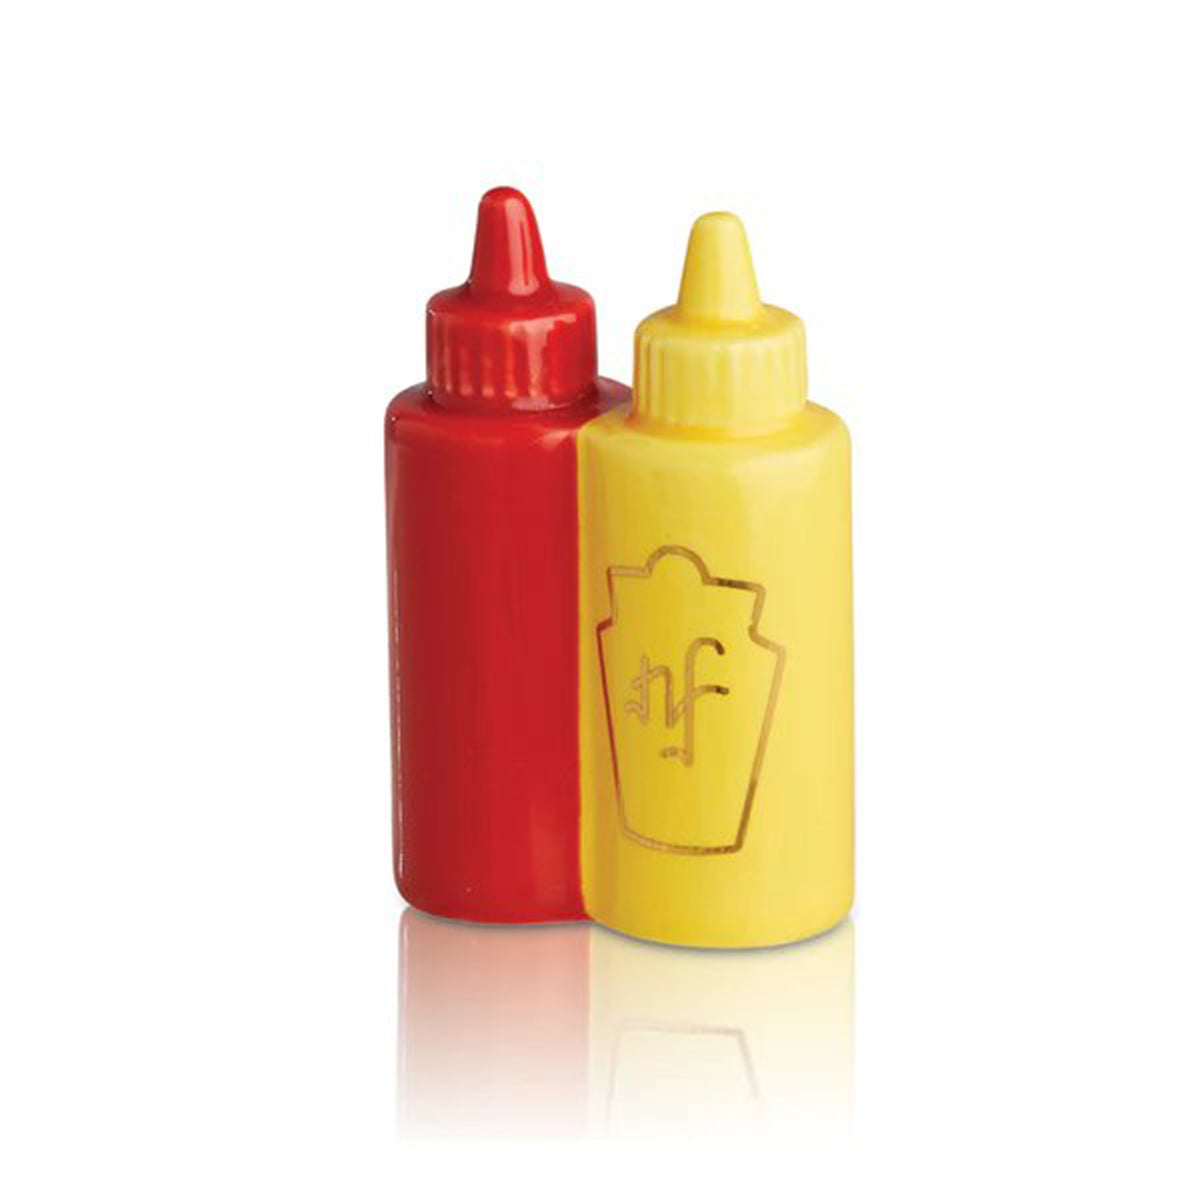 Nora Fleming "Squeeze Please" Ketchup and Mustard Mini